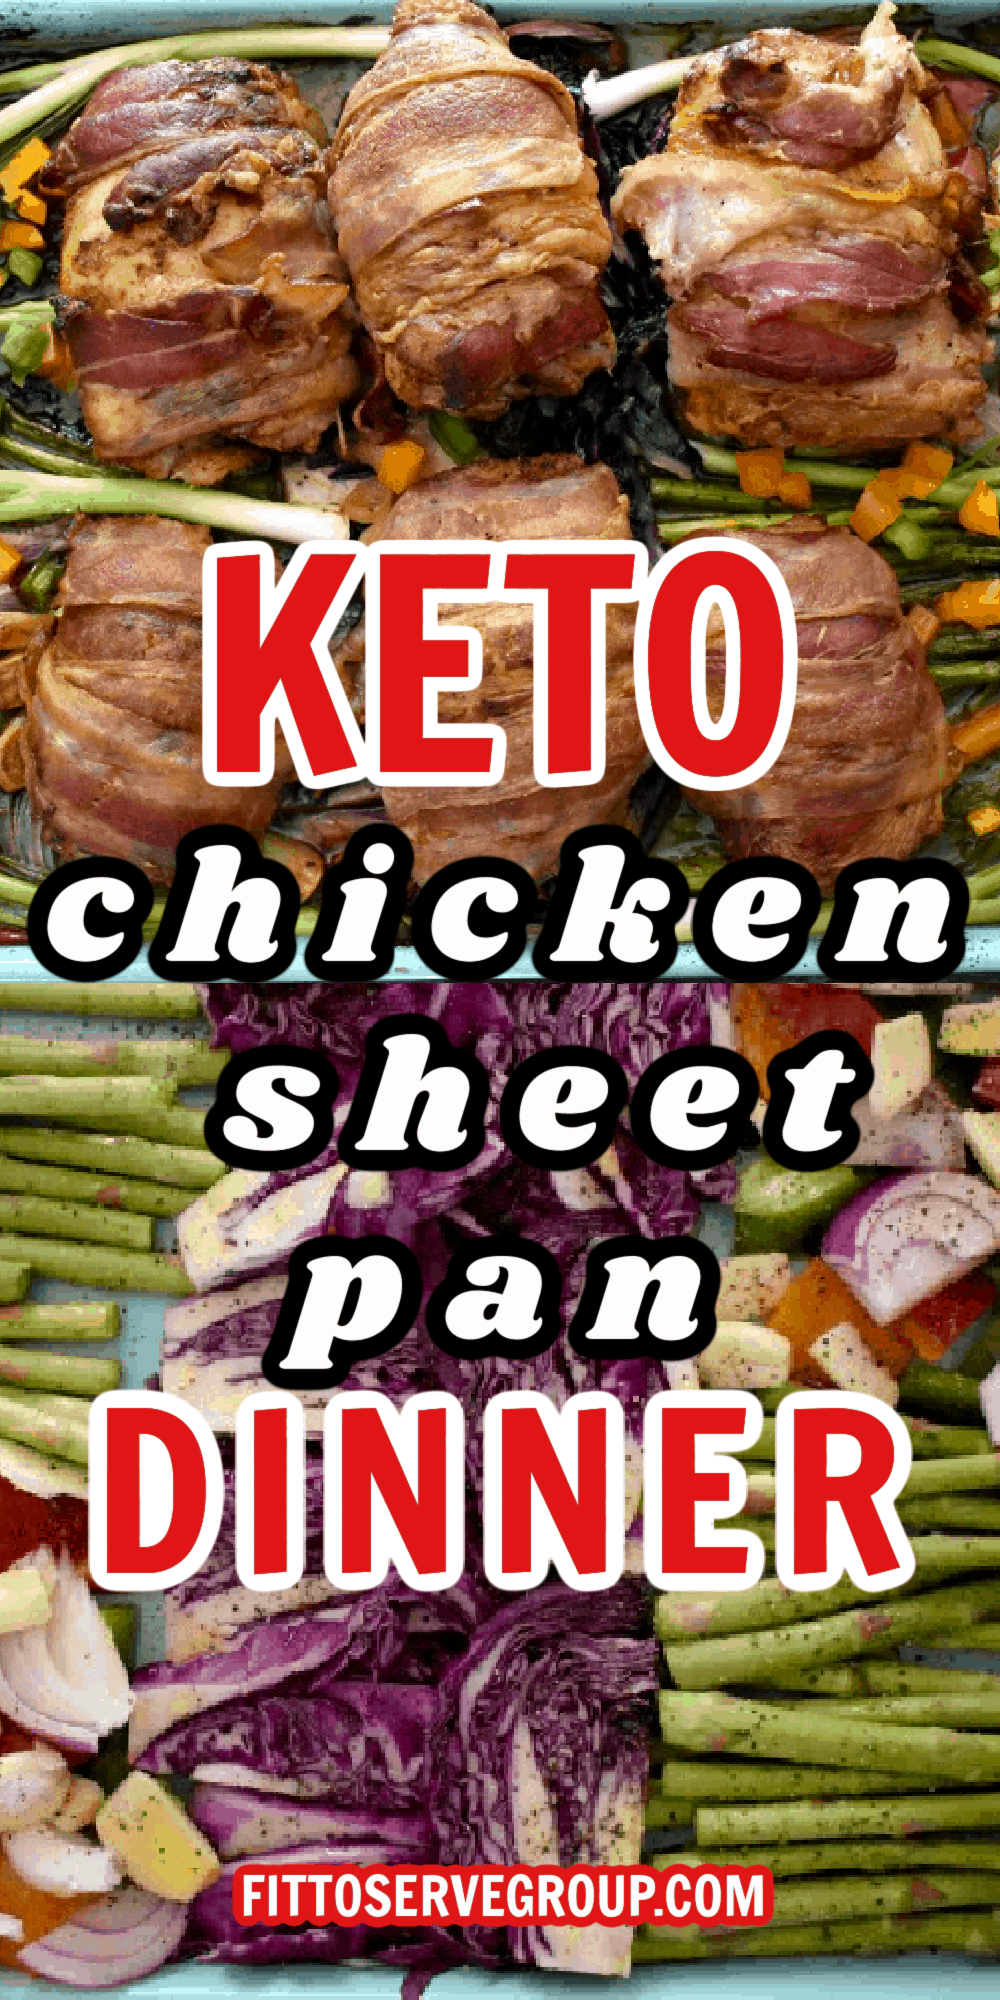 keto chicken sheet pan dinner over low carb vegetables